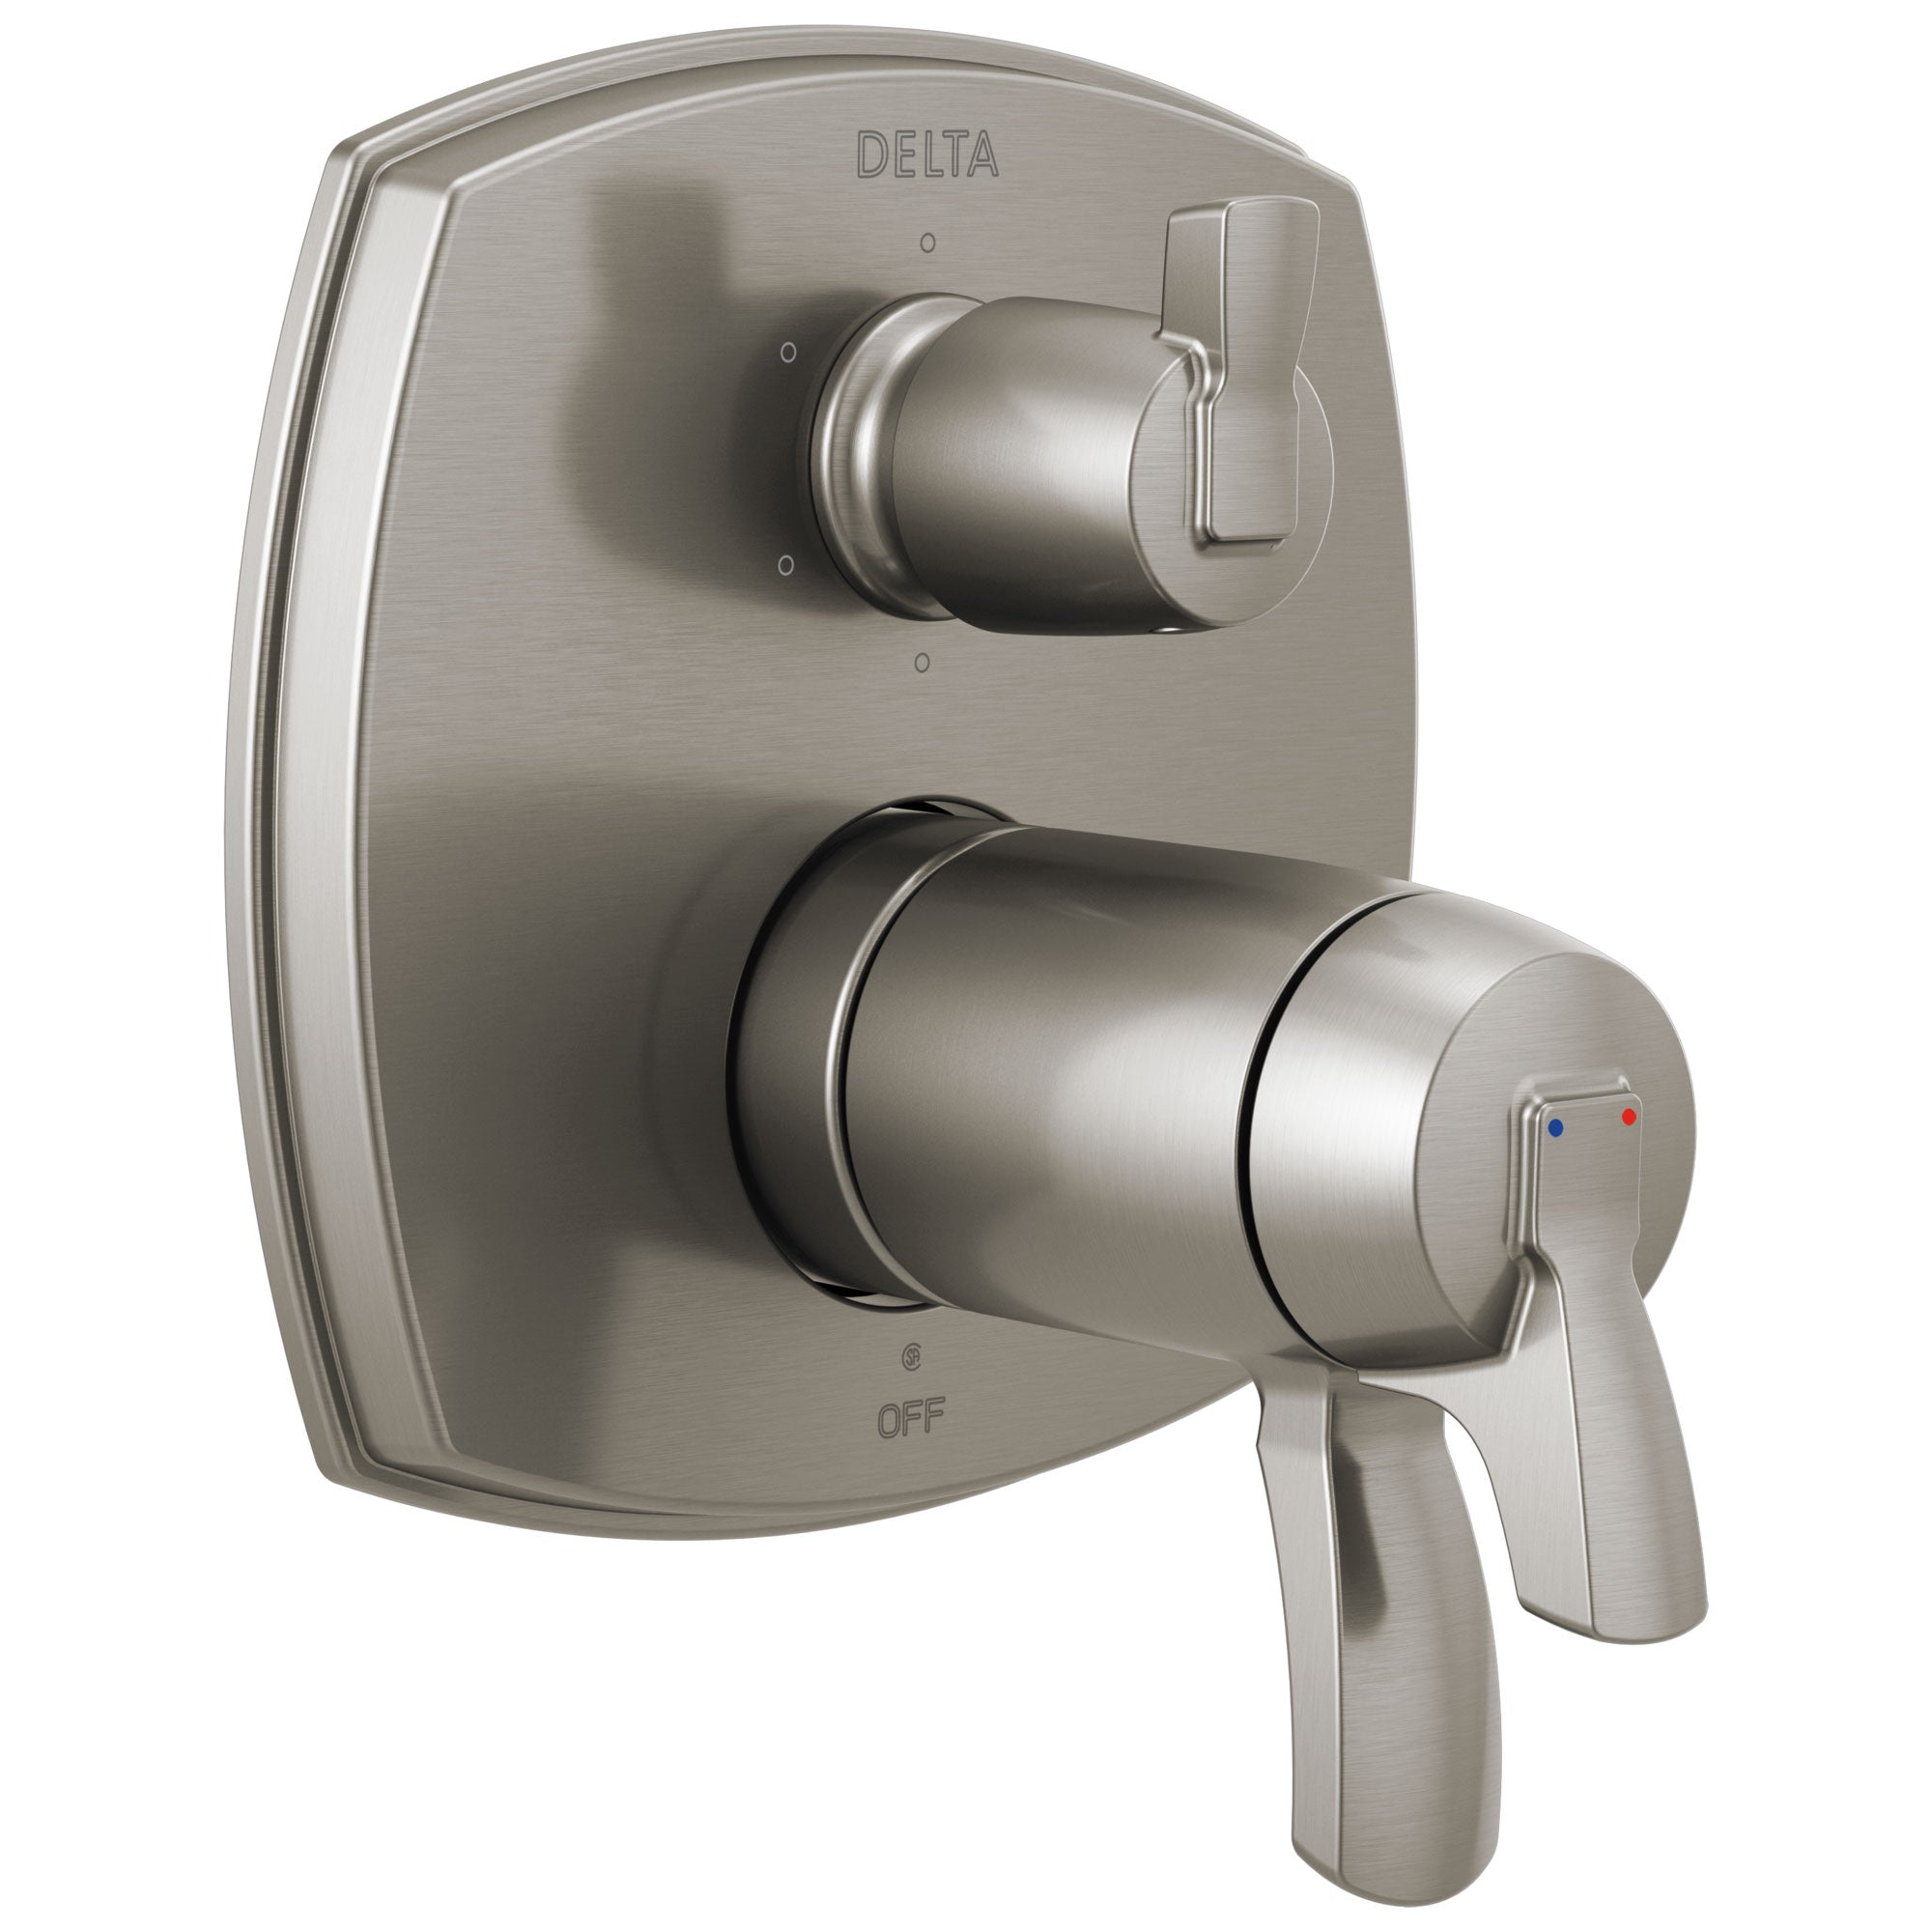 Delta Stryke Stainless Steel Finish 17T Thermostatic Shower System Control with 6 Function Integrated Diverter Includes Valve and Handles D3073V